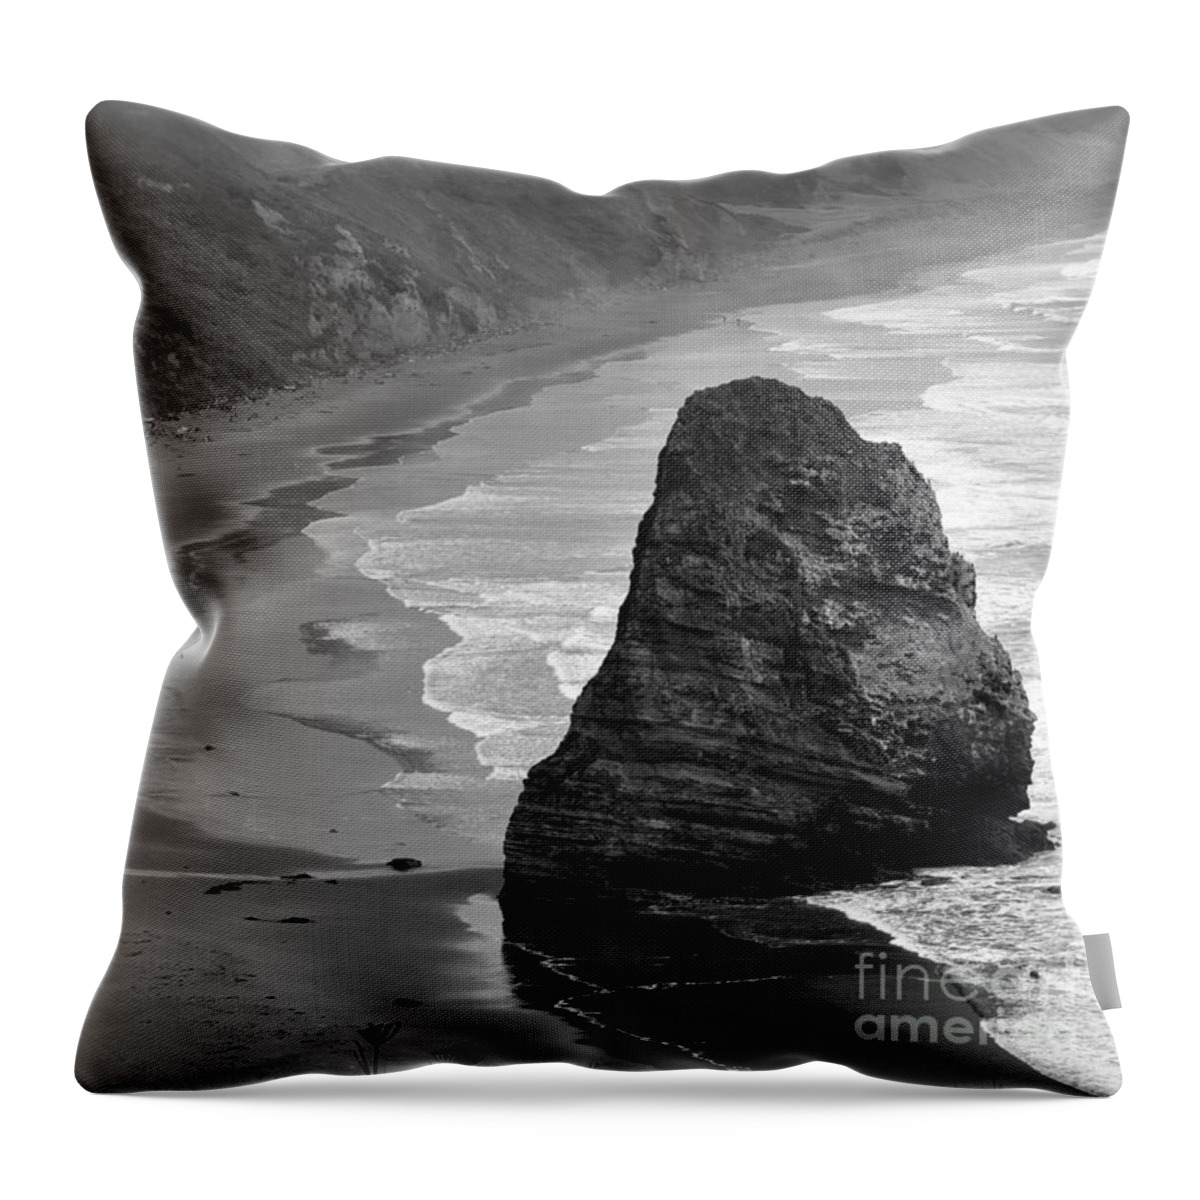 Beach-photographs Throw Pillow featuring the photograph The Rock #1 by Kirt Tisdale